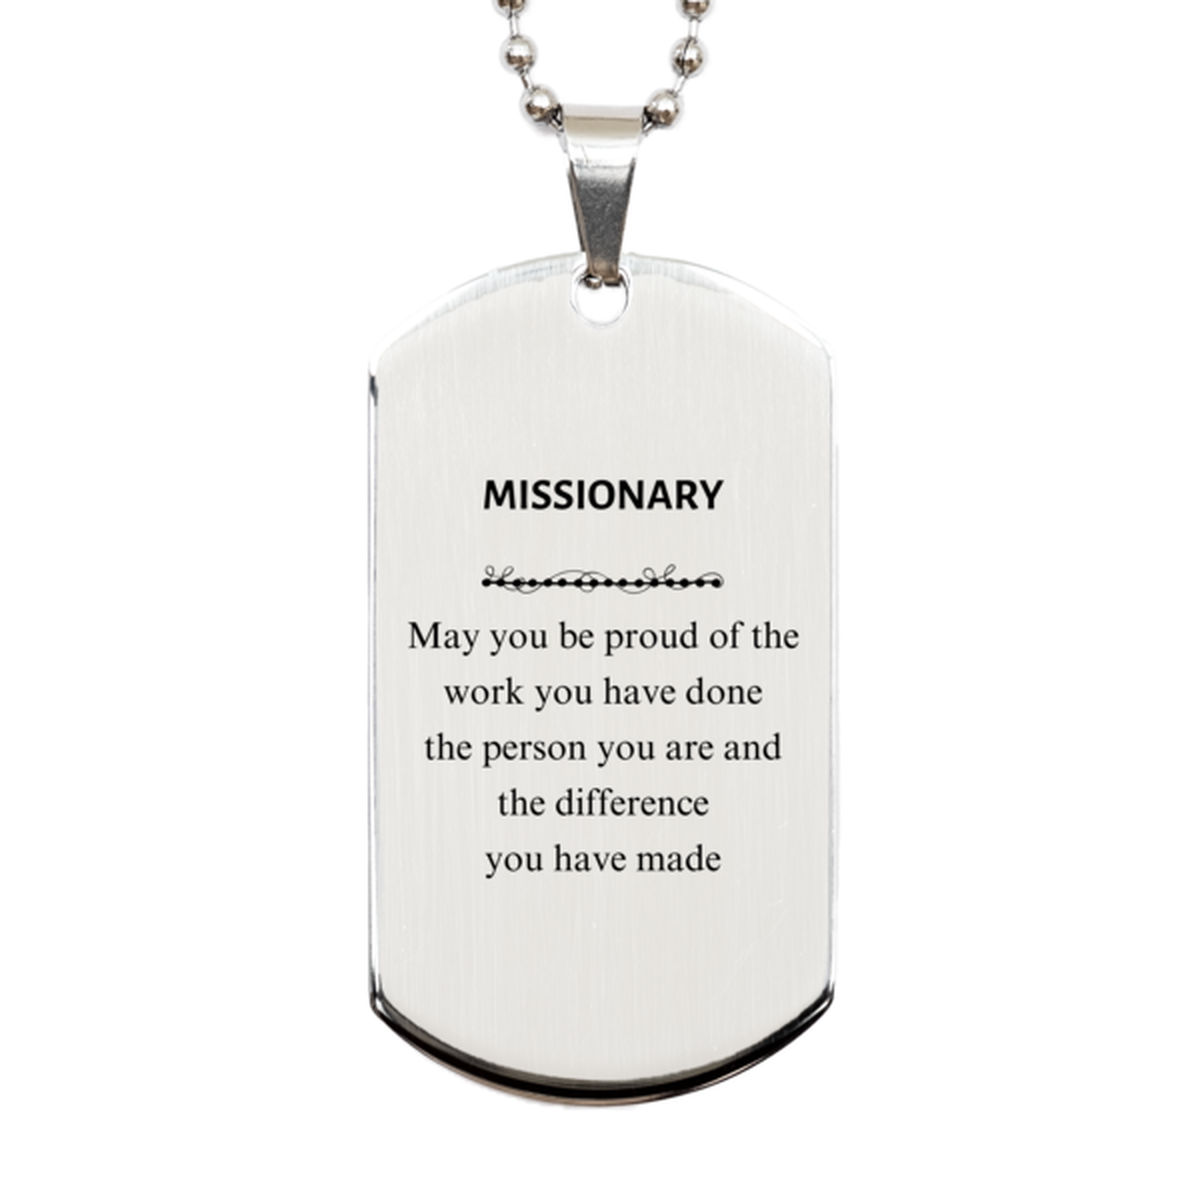 Missionary May you be proud of the work you have done, Retirement Missionary Silver Dog Tag for Colleague Appreciation Gifts Amazing for Missionary